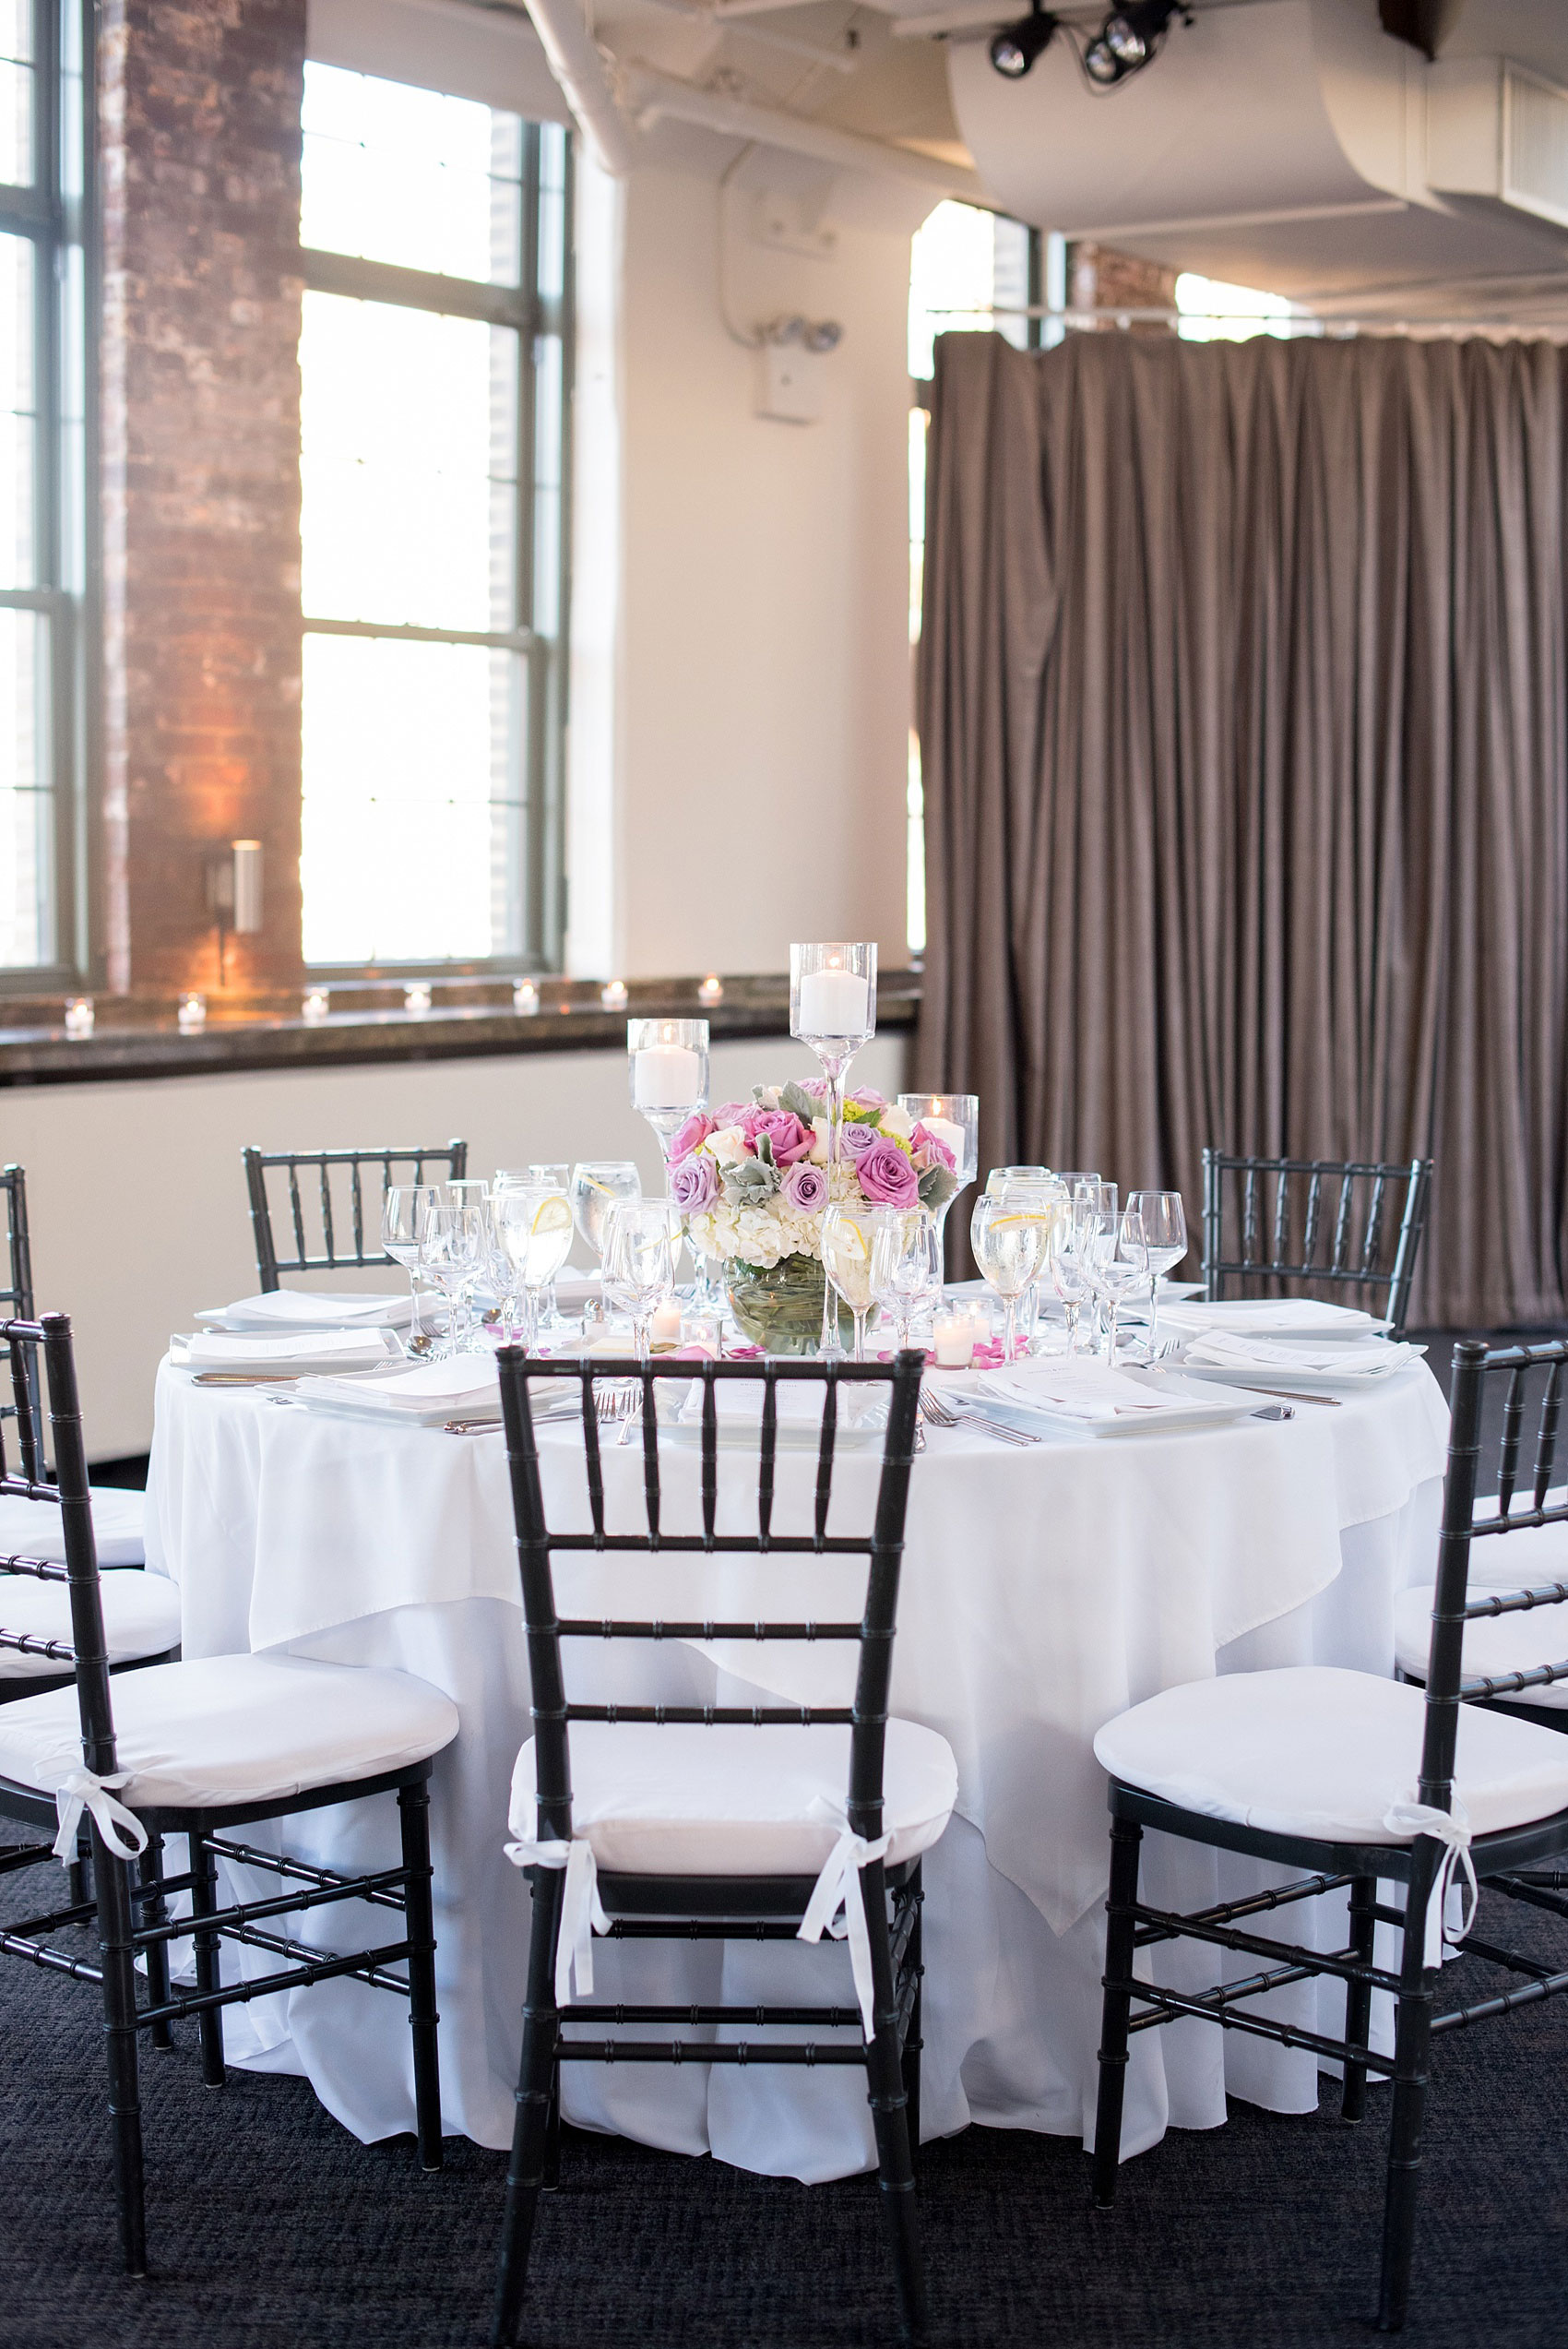 Mikkel Paige Photography photos of a NYC wedding at Tribeca Rooftop. An image of the reception with white linens and purple accents.